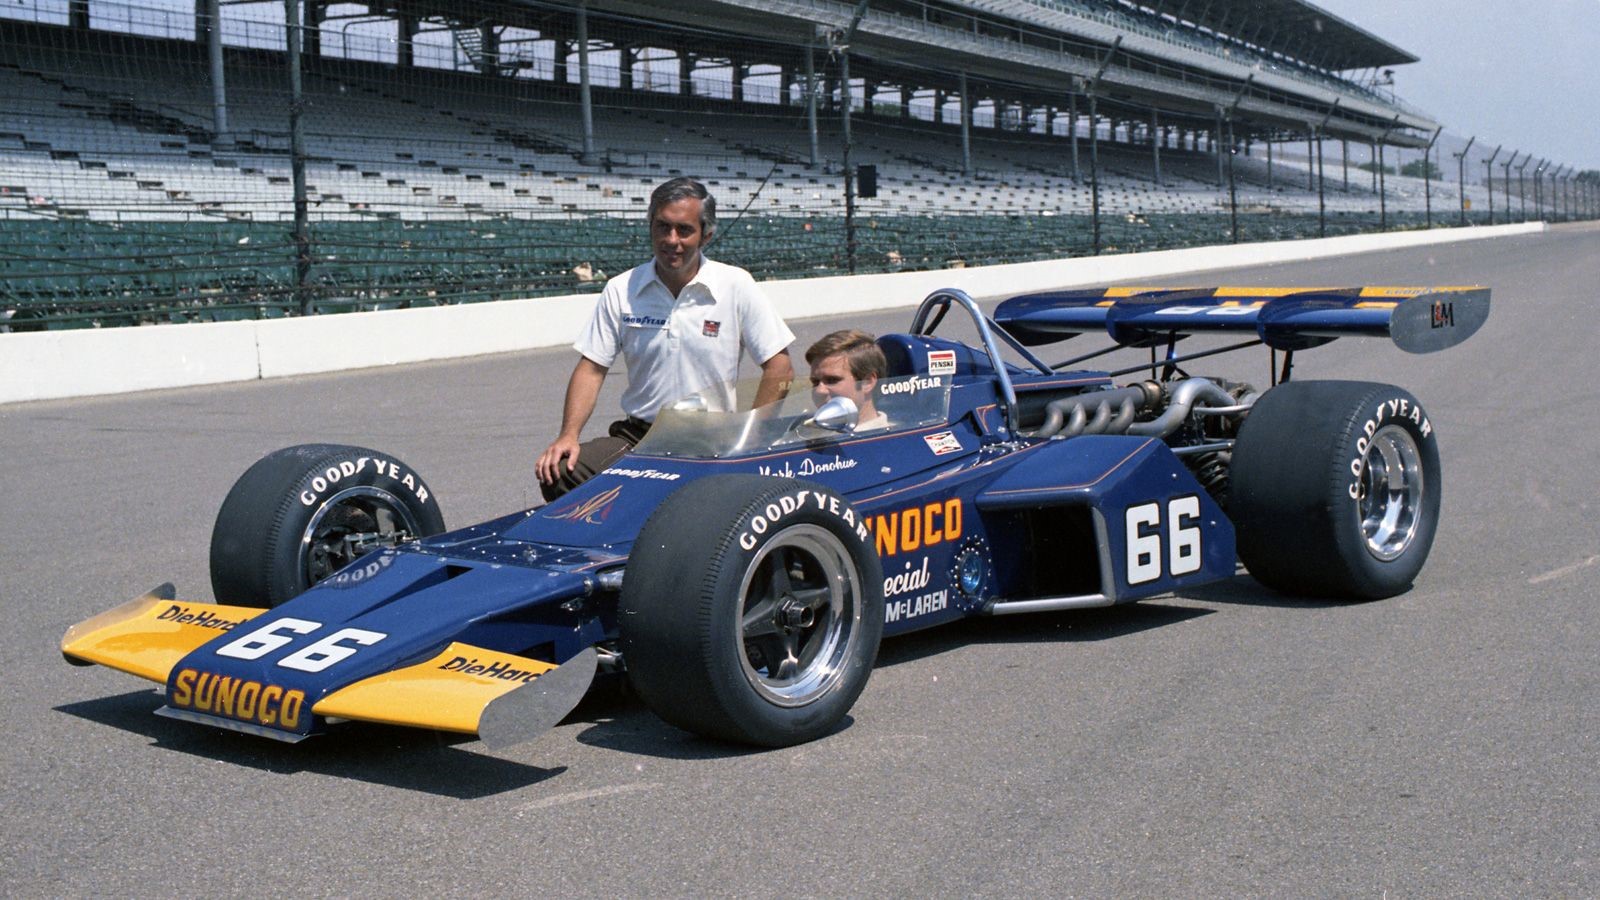 The n. 66 Penske Racing entry went on to win at Indianapolis in 1972 to give Roger Penske the first of his 17 Indy 500 wins. 